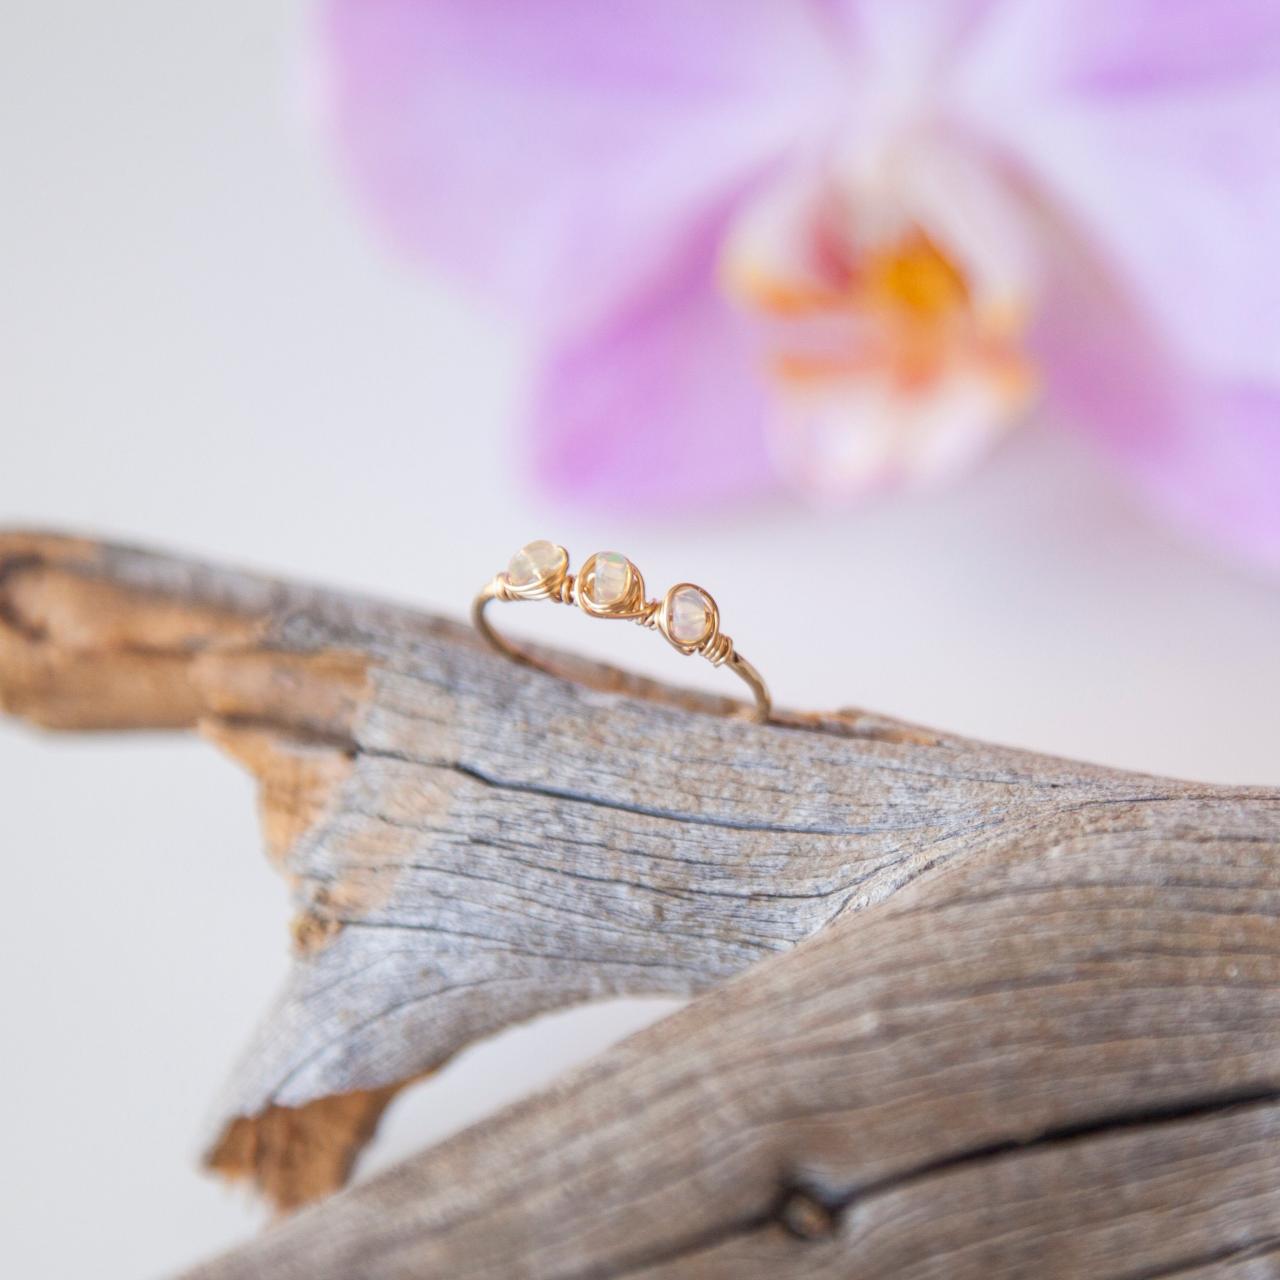 Triple Ethiopian Opal Gold-filled Ring, Dainty Textured Band Ring, Unique Jewelry Gift For Her